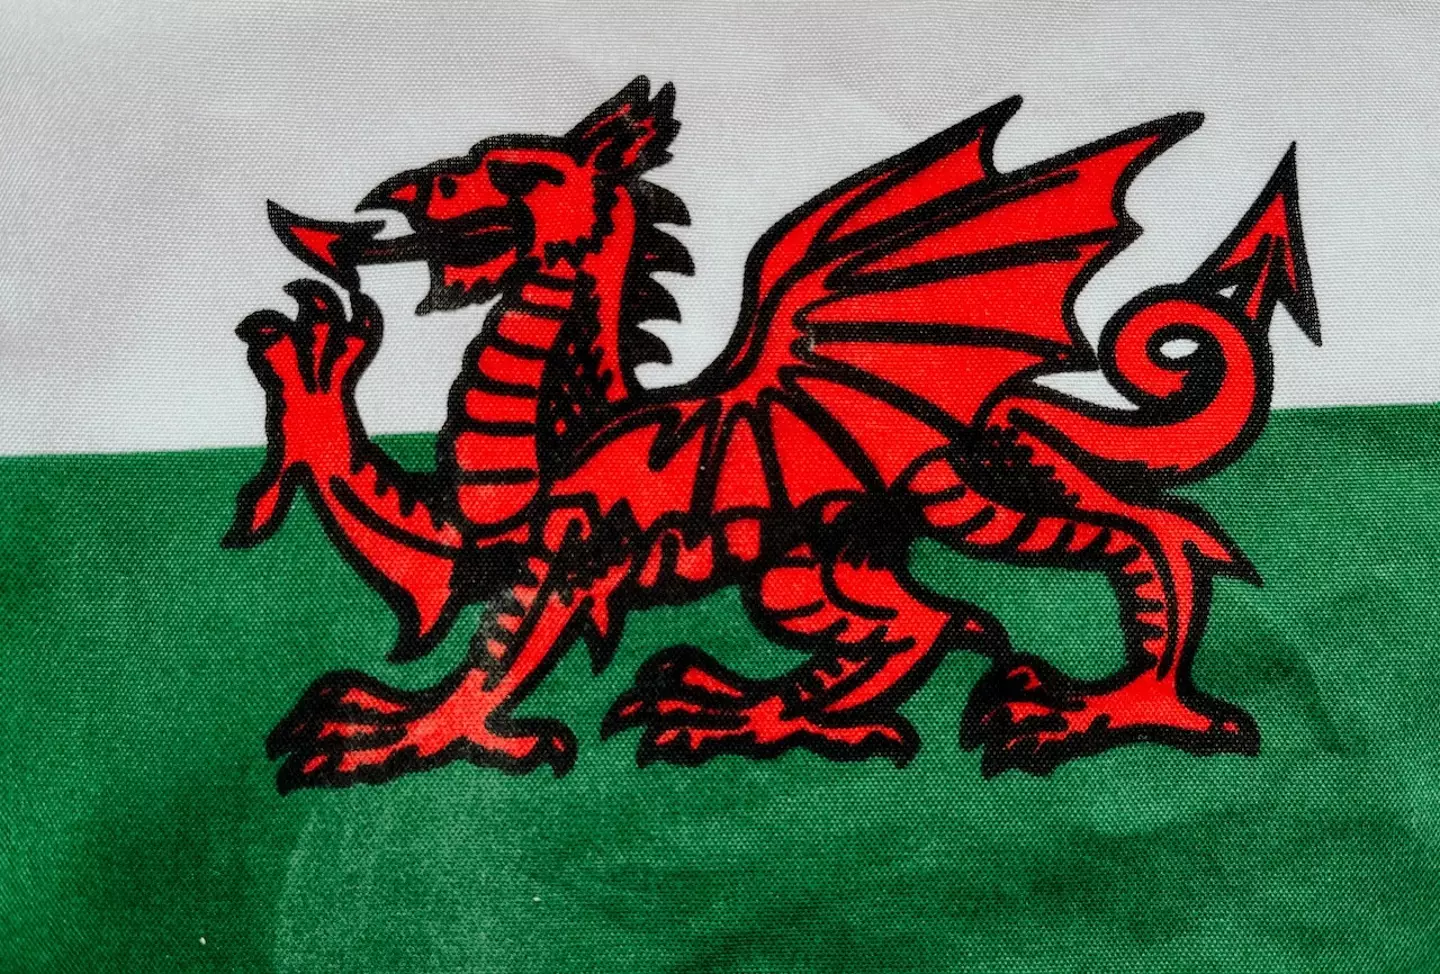 A Wales supporter in Qatar has died, according to a fans' group.